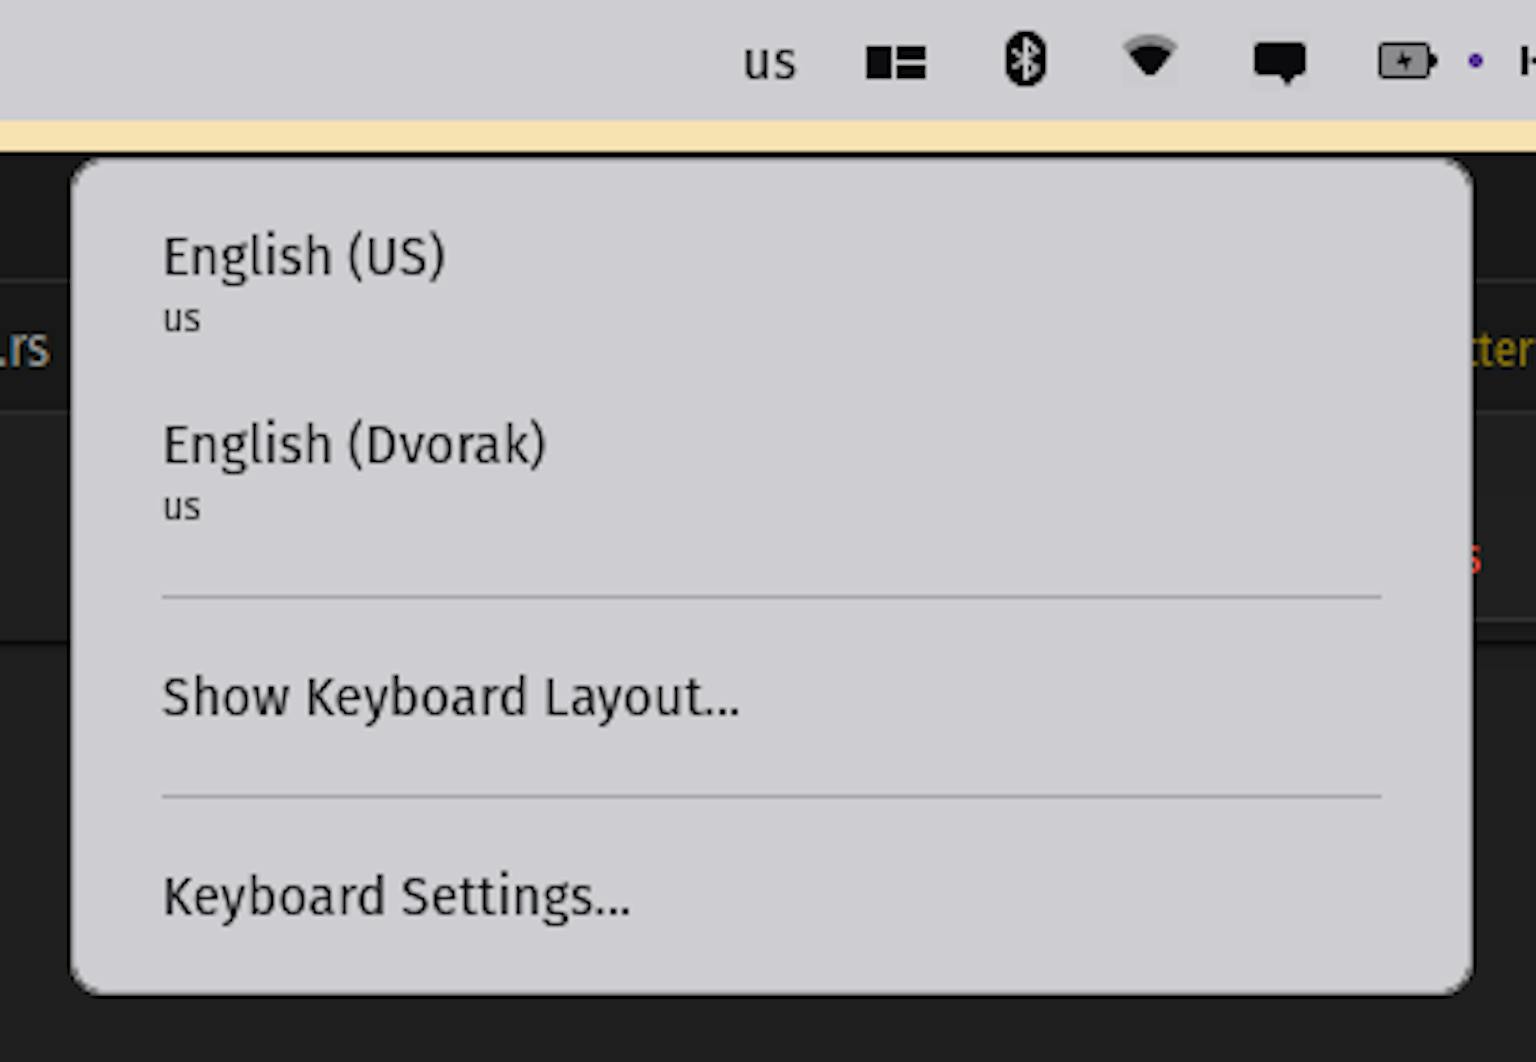 Dominic's input sources applet presents options to change the language of the keyboard from English (US), change the layout from English (Dvorak), show the user's keyboard layout, and open keyboard settings.